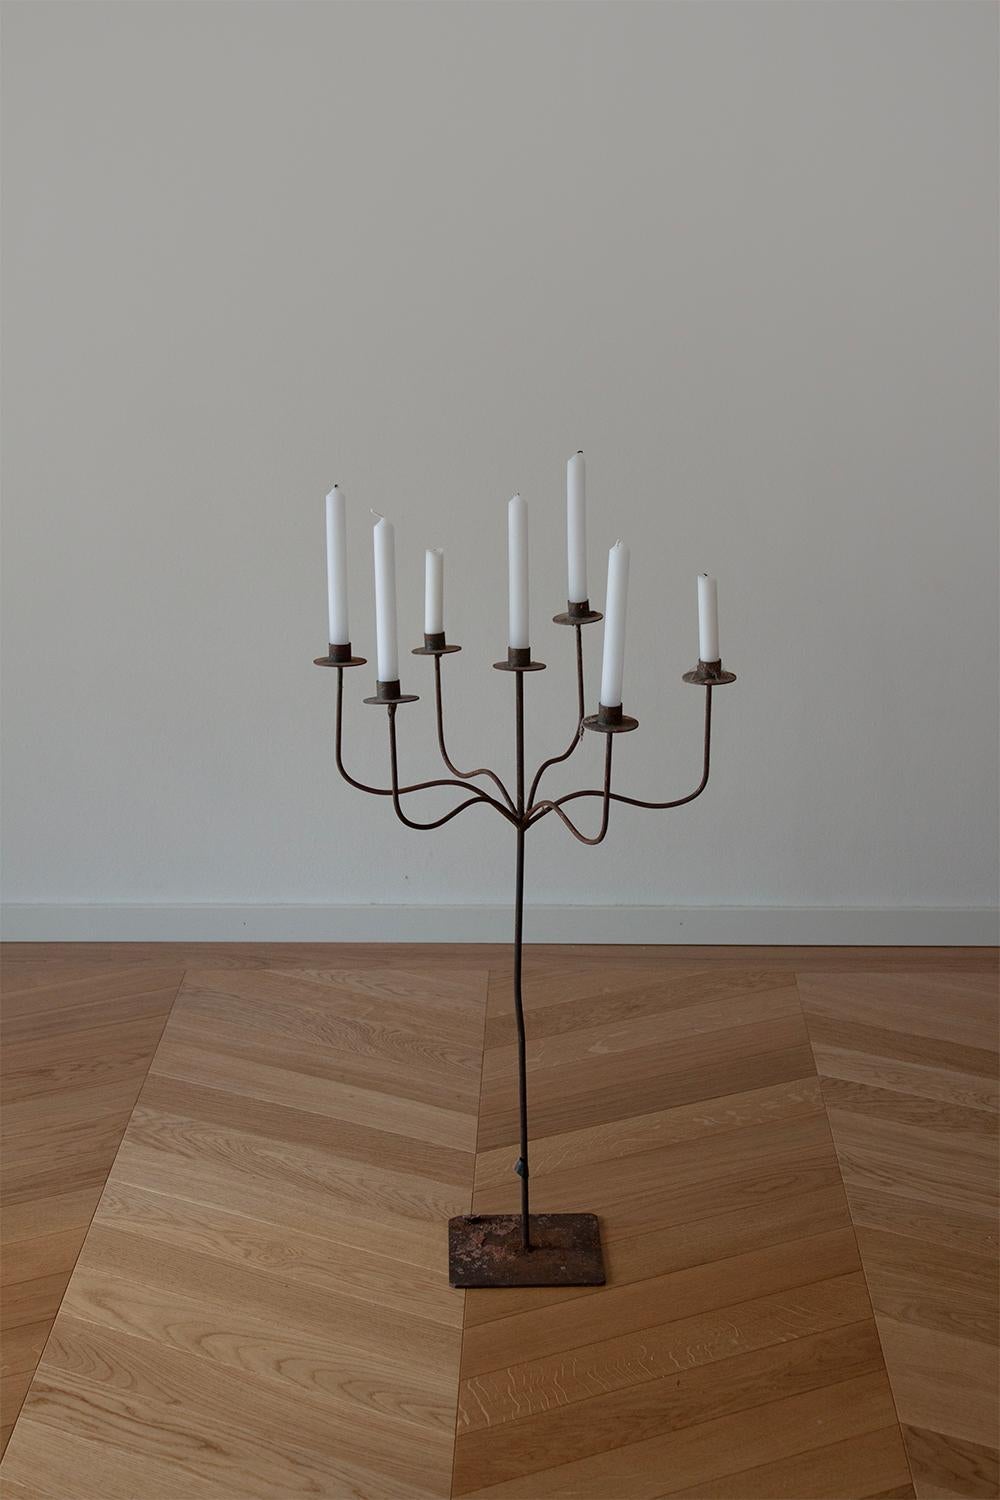 This large French iron candelabra is a magnificent centerpiece that effortlessly infuses any home with a touch of chateau grandeur.
Made from Iron it's been Hand bent and welded. The straight lines and delicate curves are all meticulously